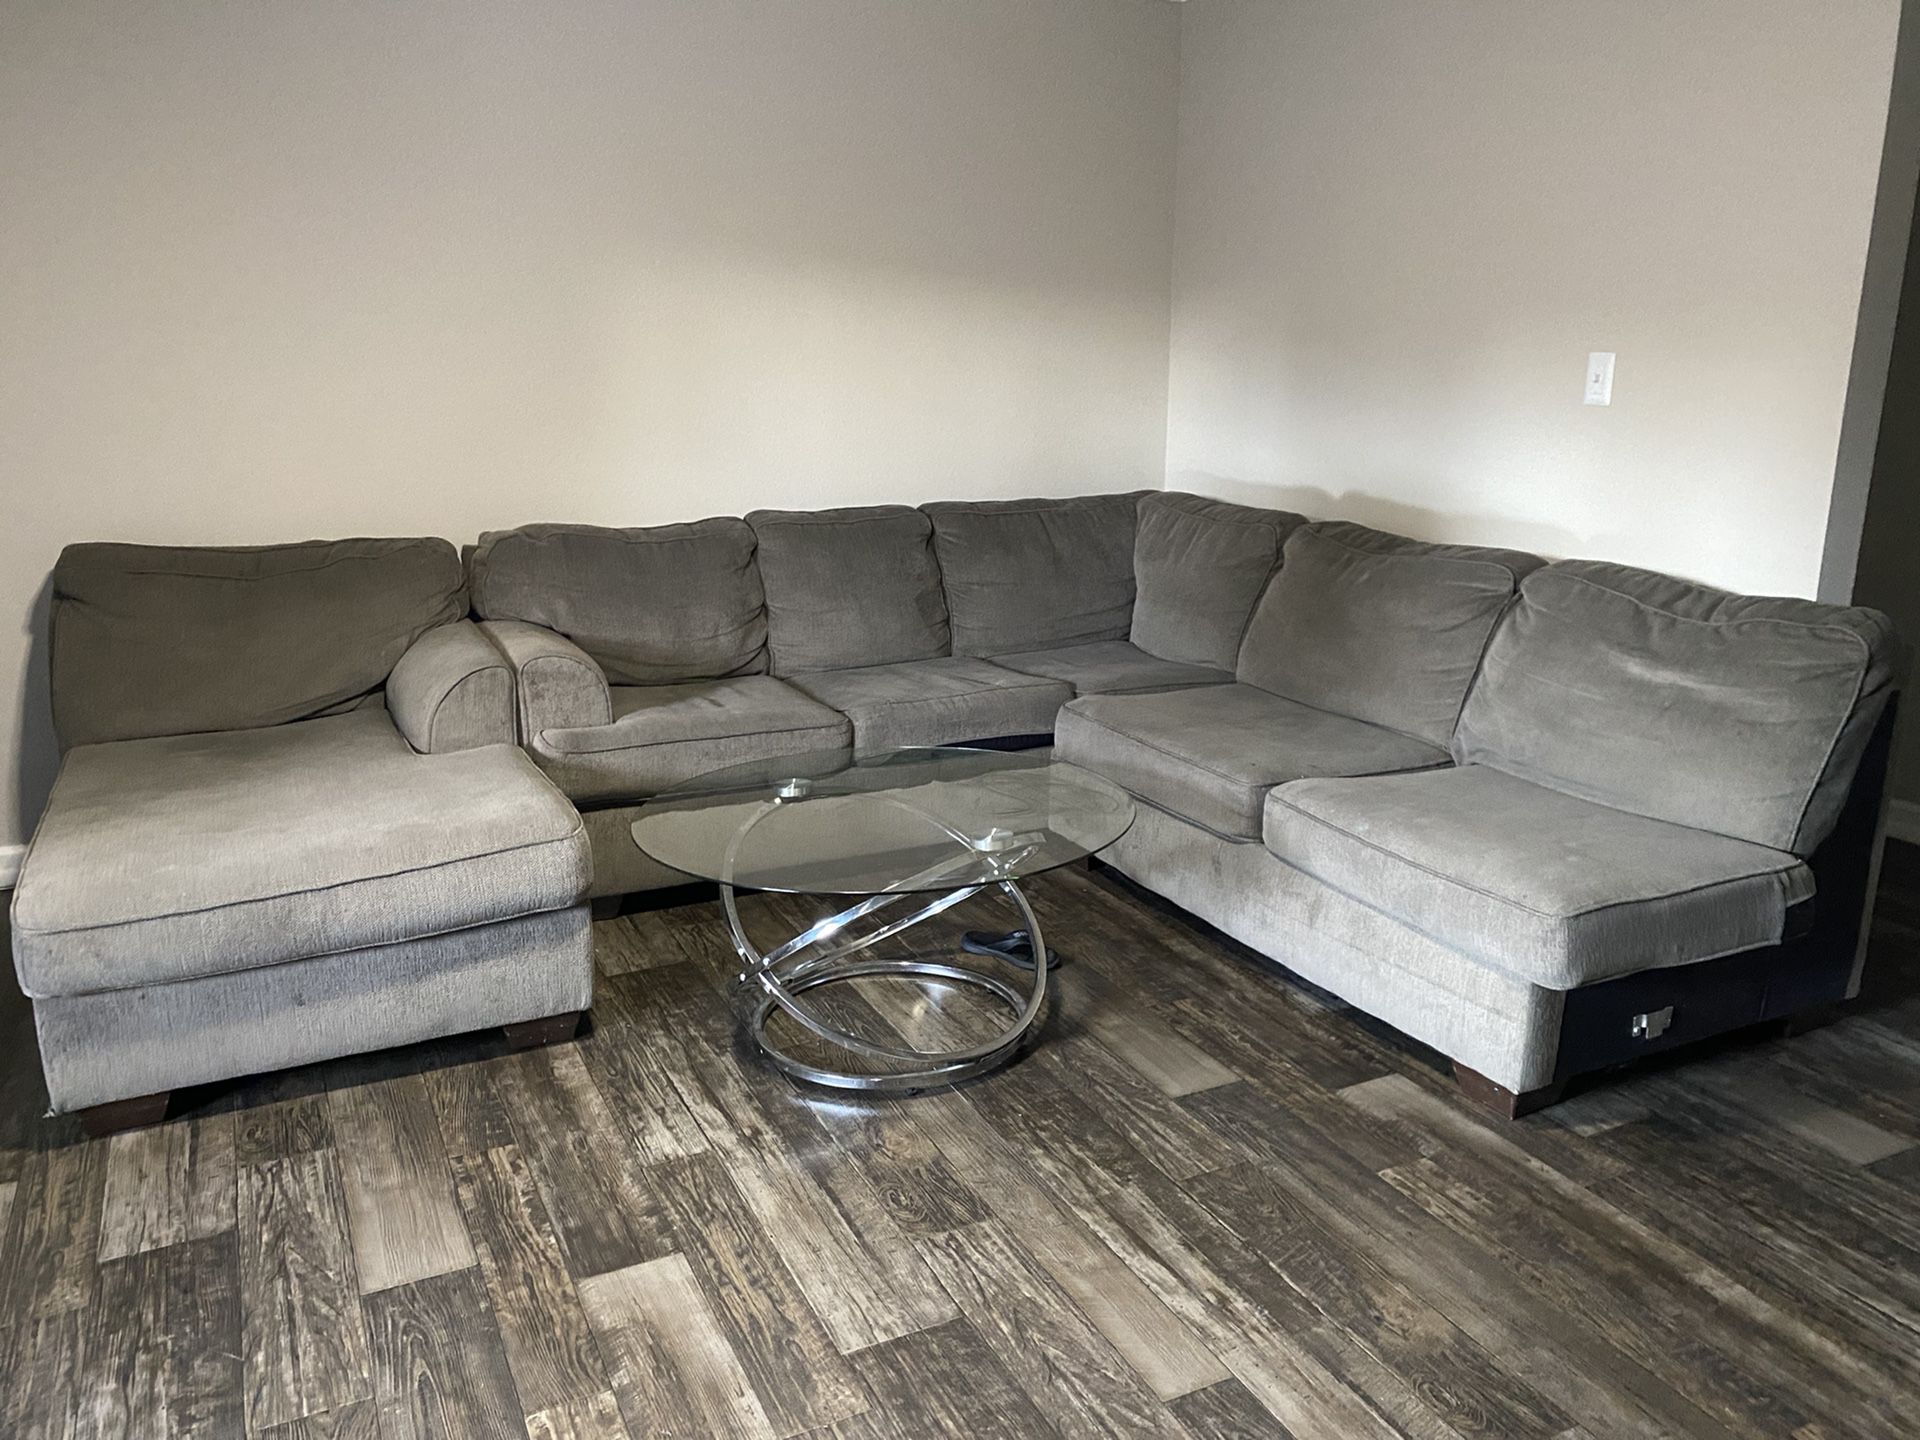 Bundle! Couch with glass coffee table and two glass end tables